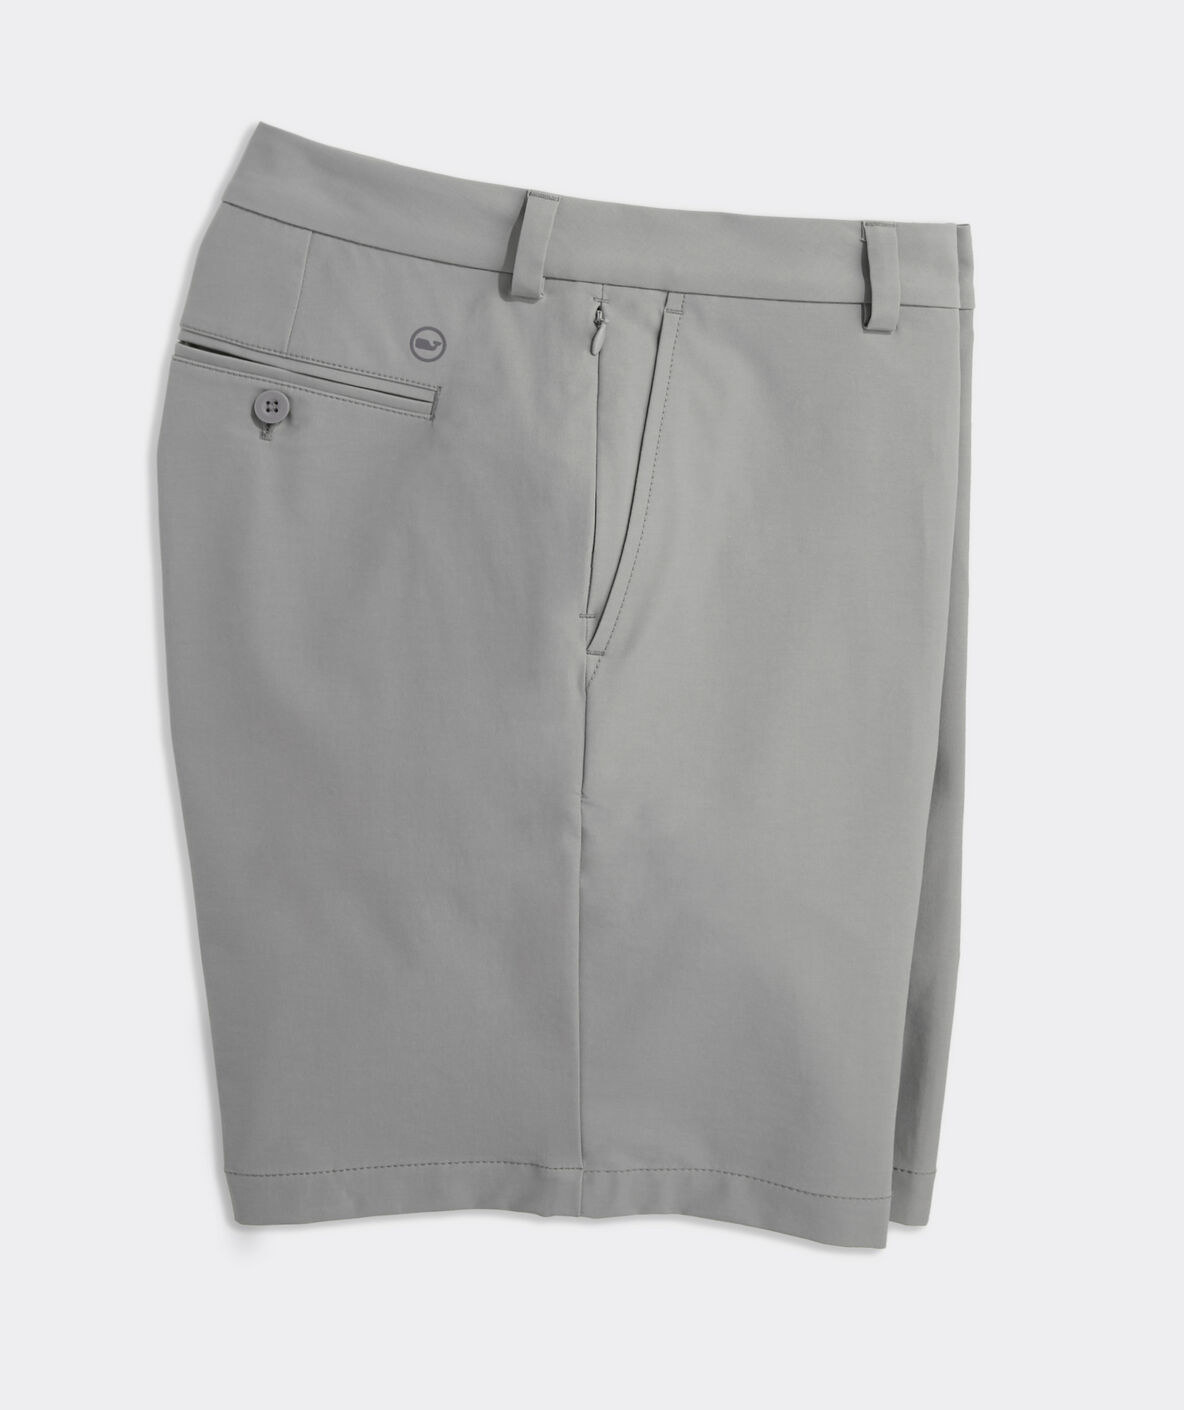 A pair of the golf shorts